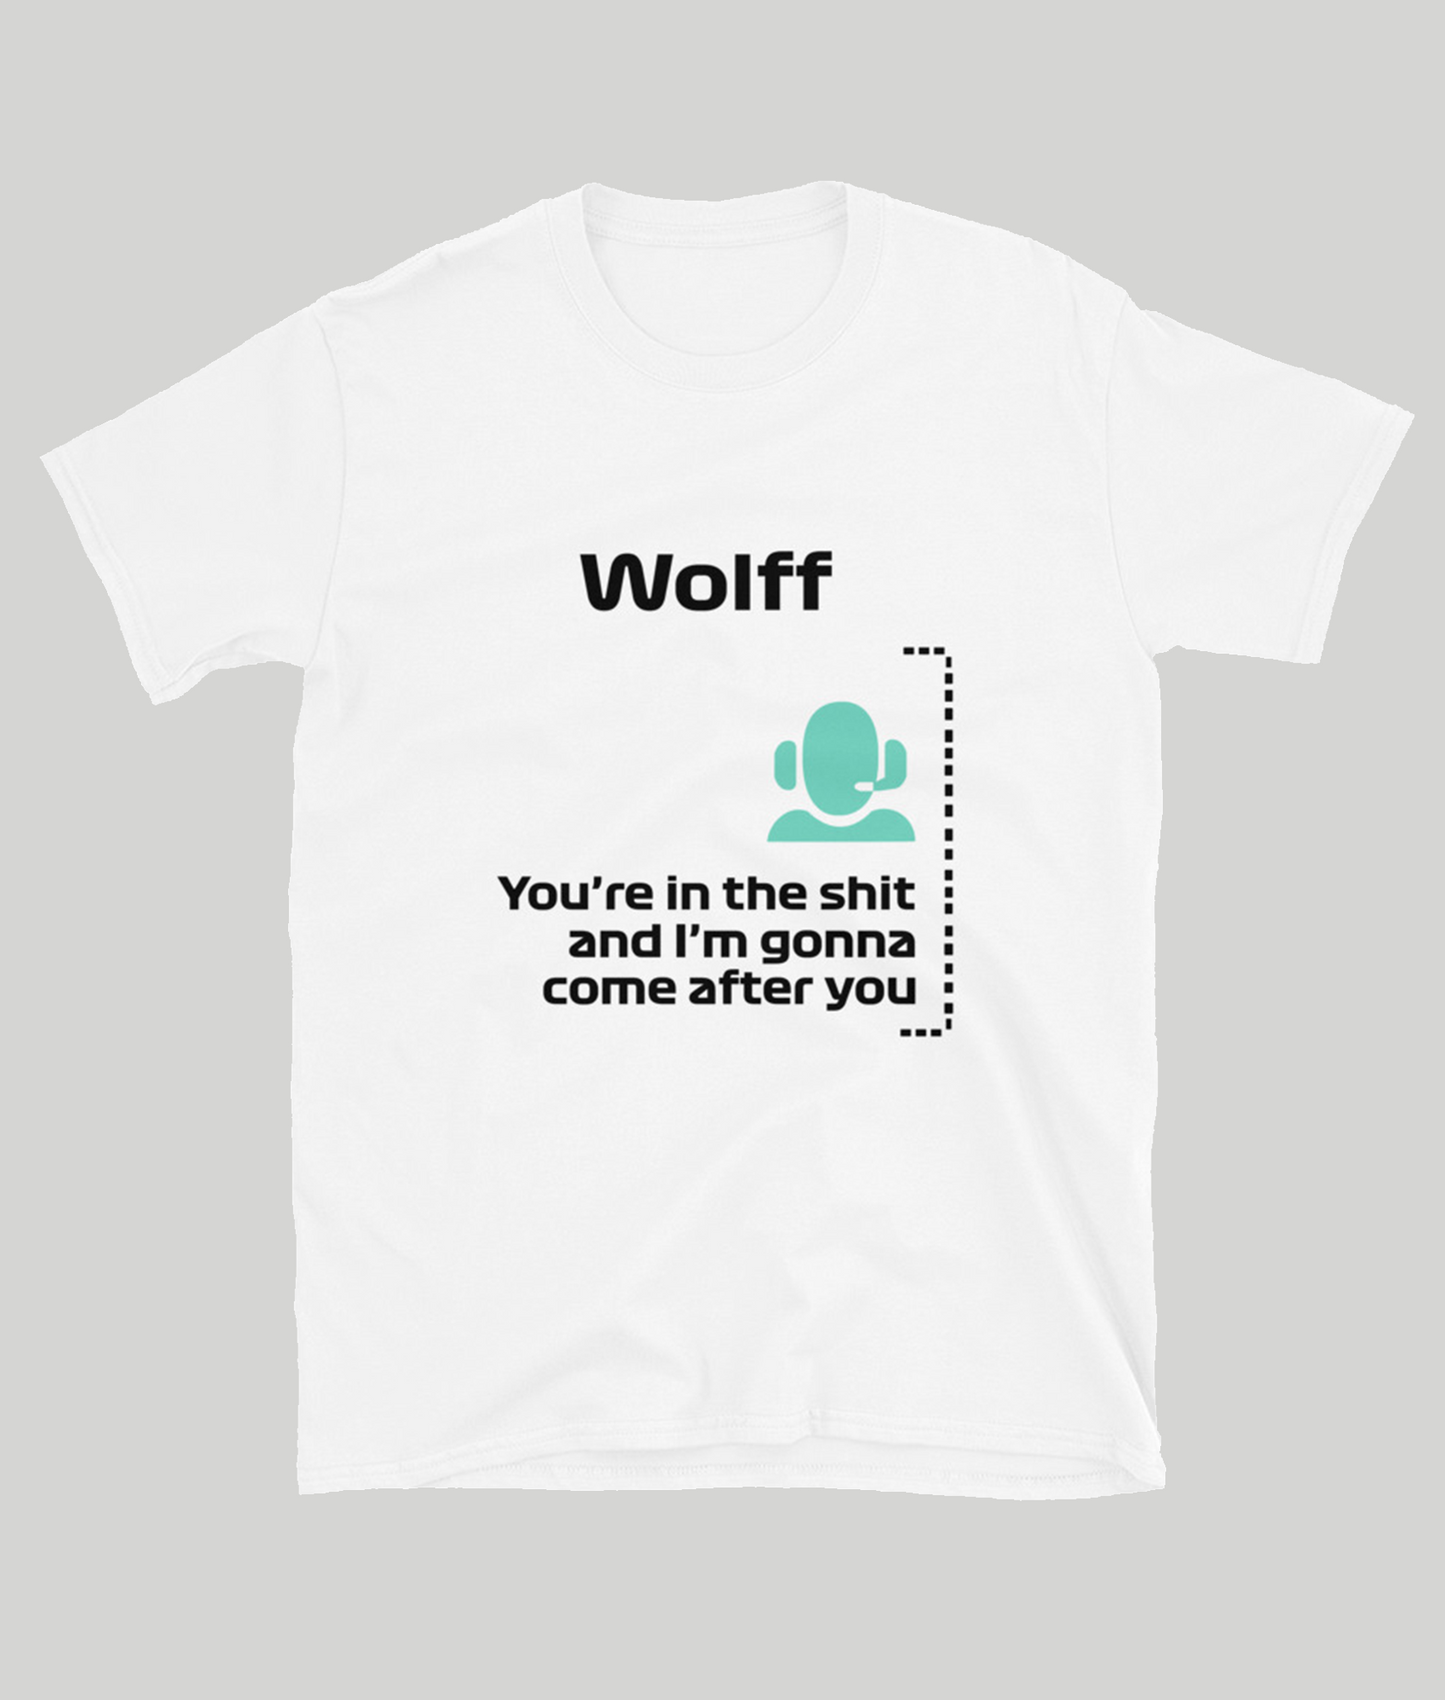 Toto Wolff I'm Coming After You T-Shirt white